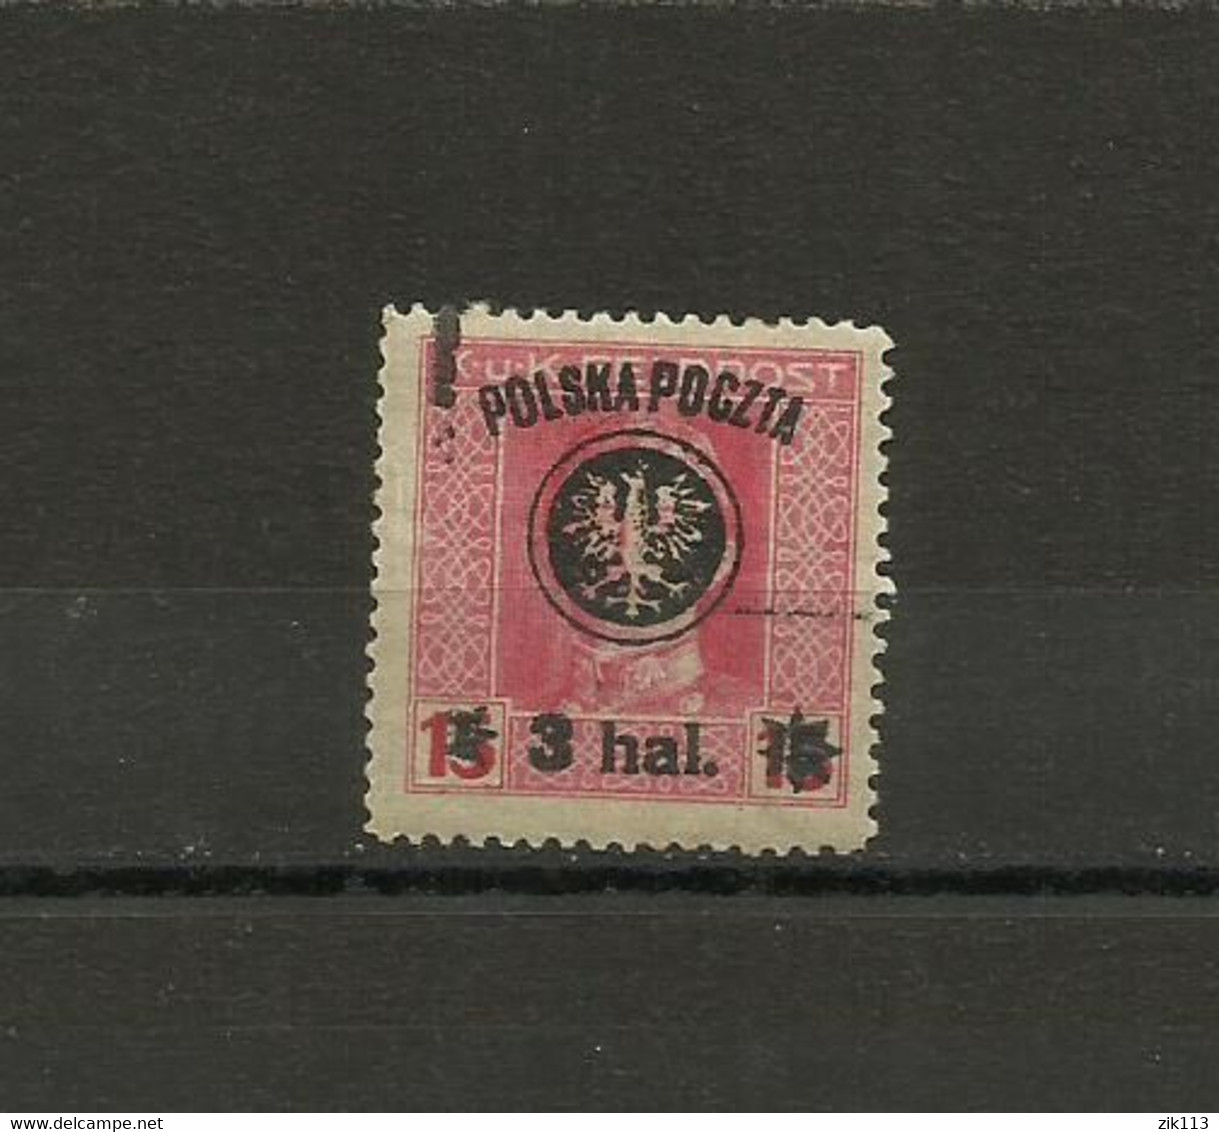 Poland 1918  - Fi. 21 Used - Used Stamps